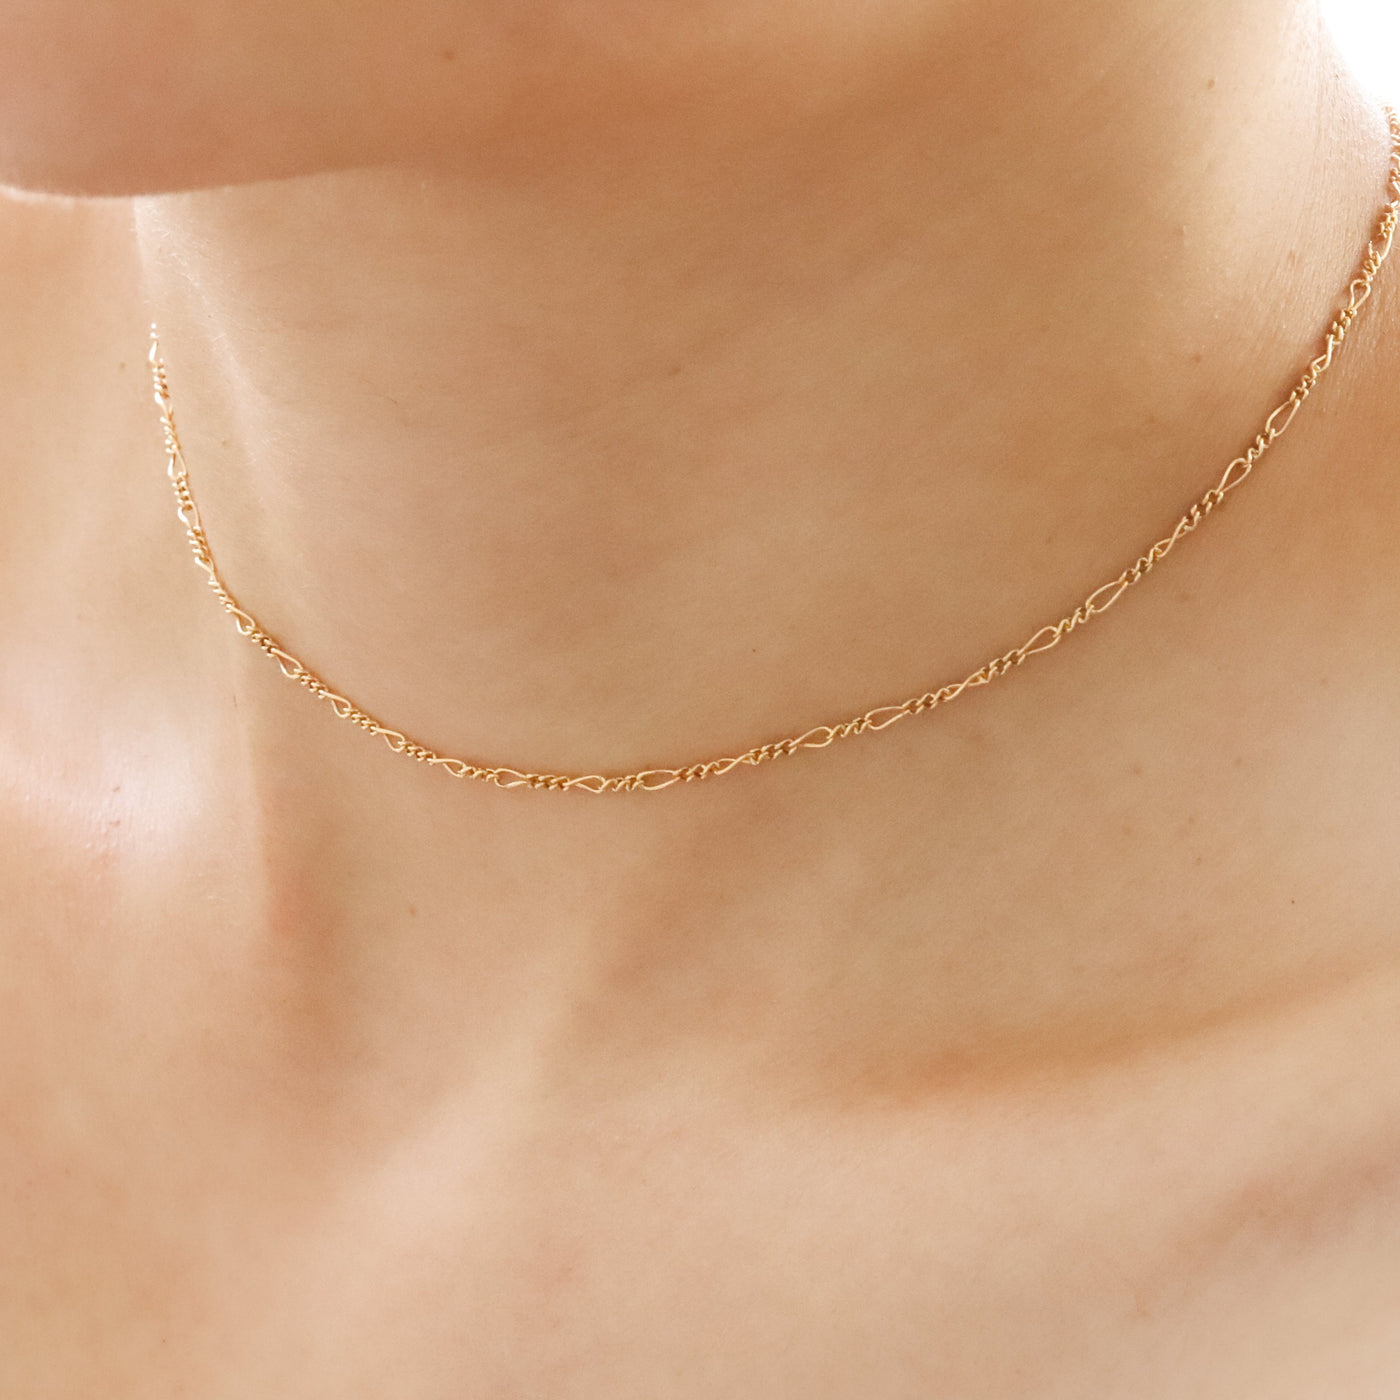 Dainty gold chain necklace